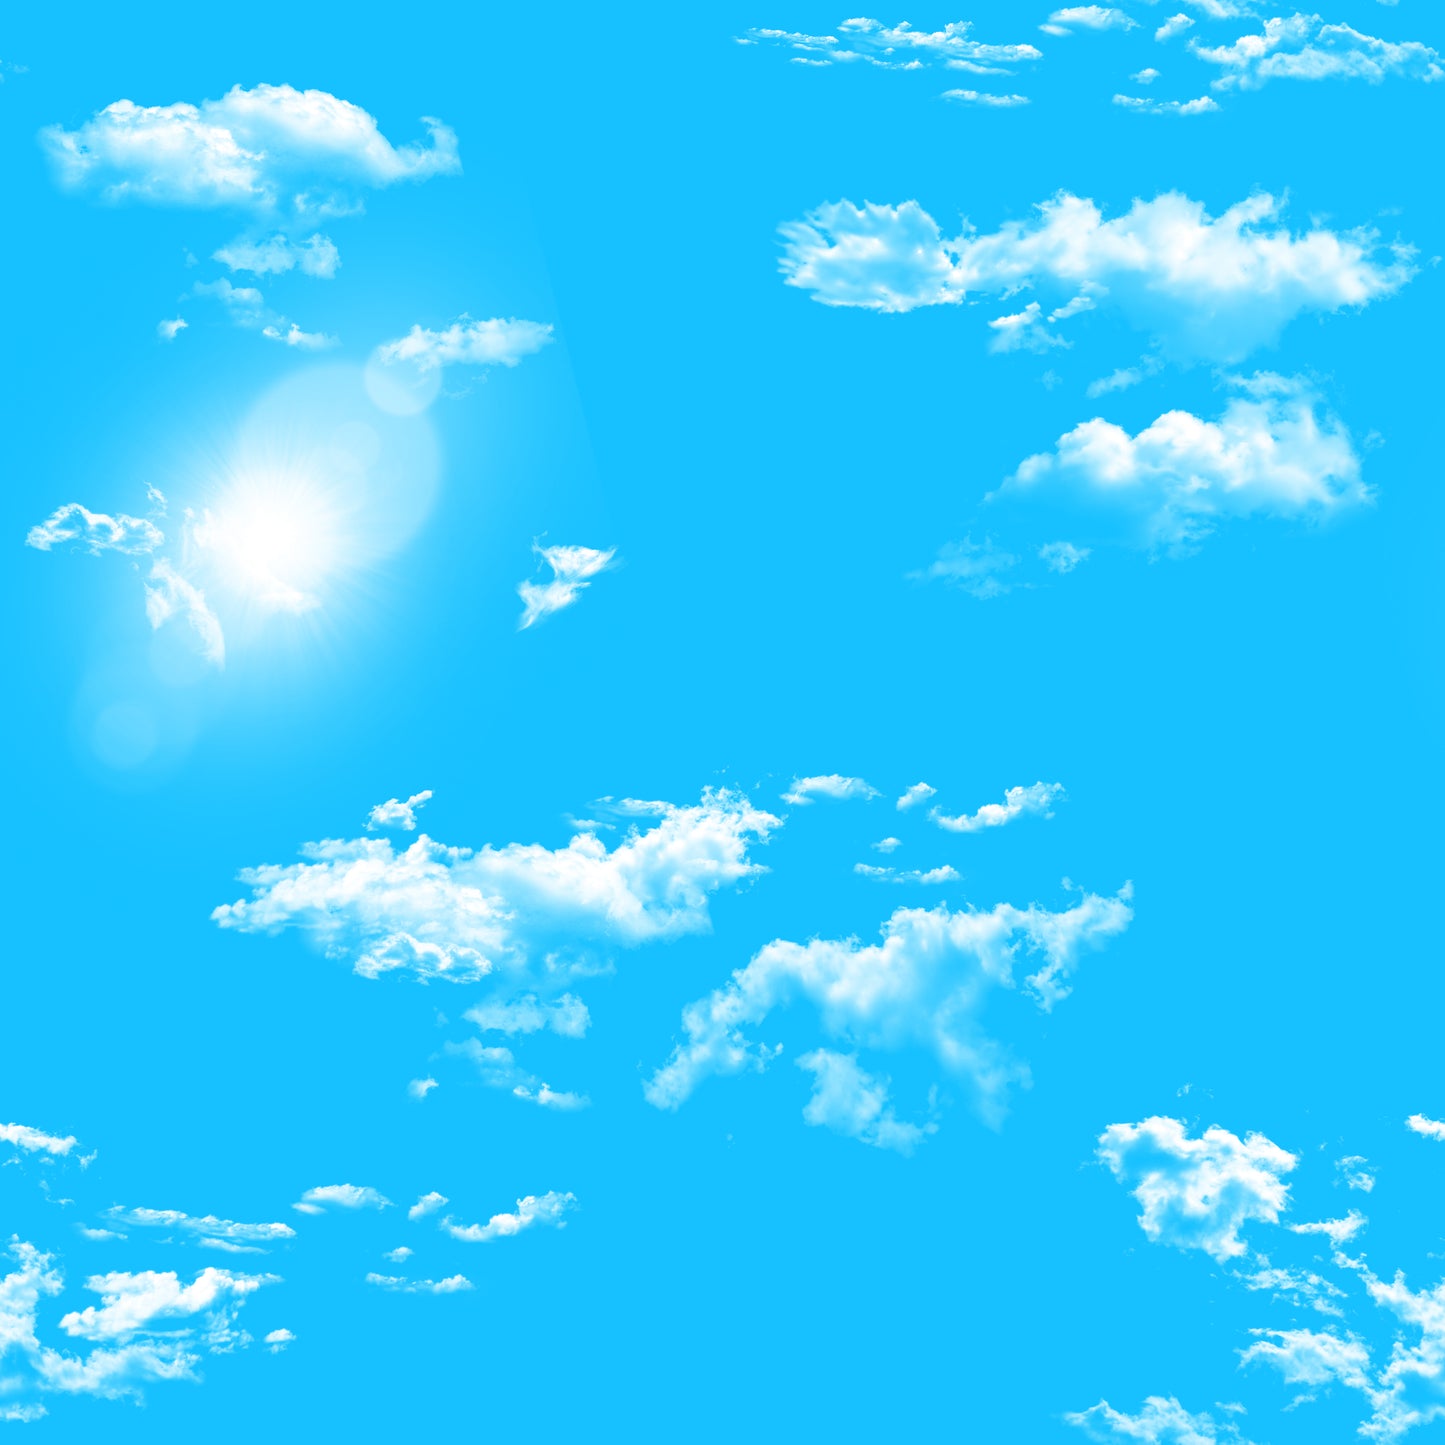 Summer Skies - Blue Sky and Clouds 008